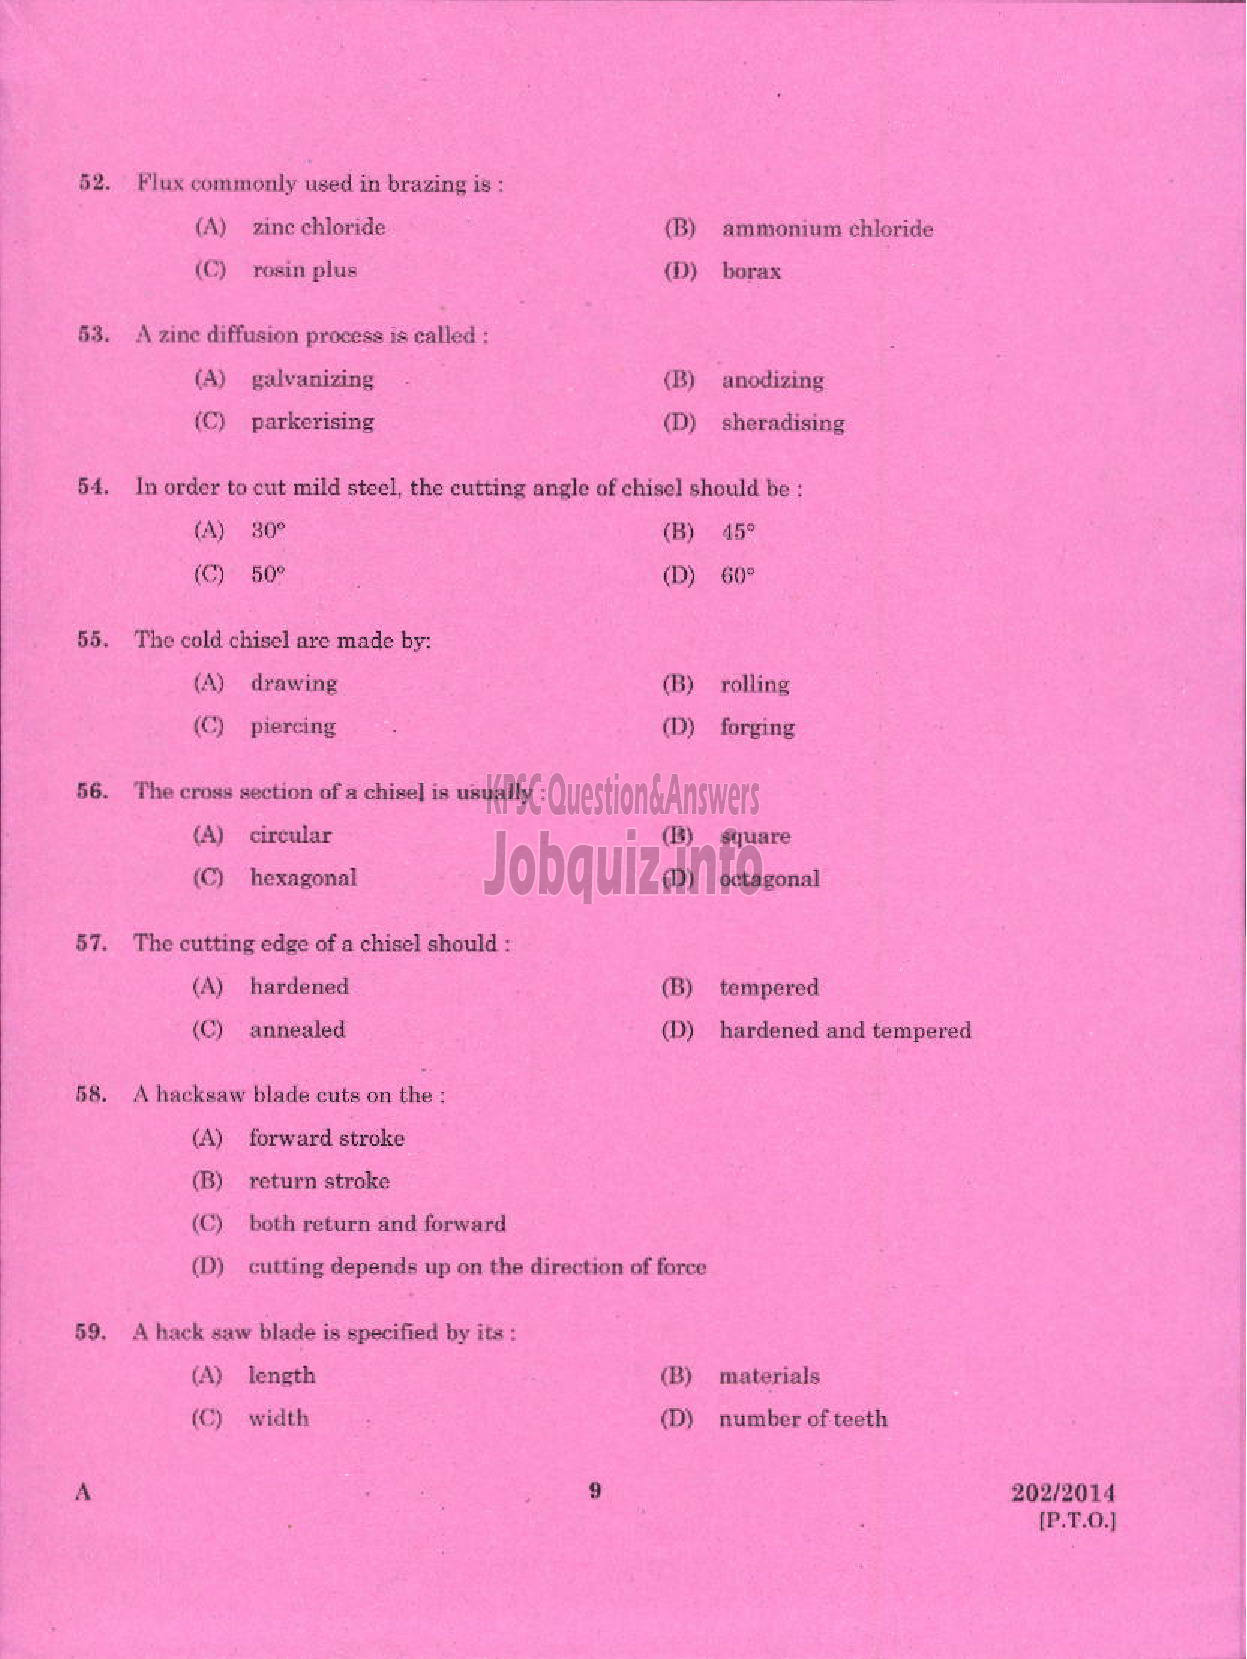 Kerala PSC Question Paper - TRADESMAN SHEET METAL ENGINEERING TECHNICAL EDUCATION TVM PTA IDK WYD AND KGD-7